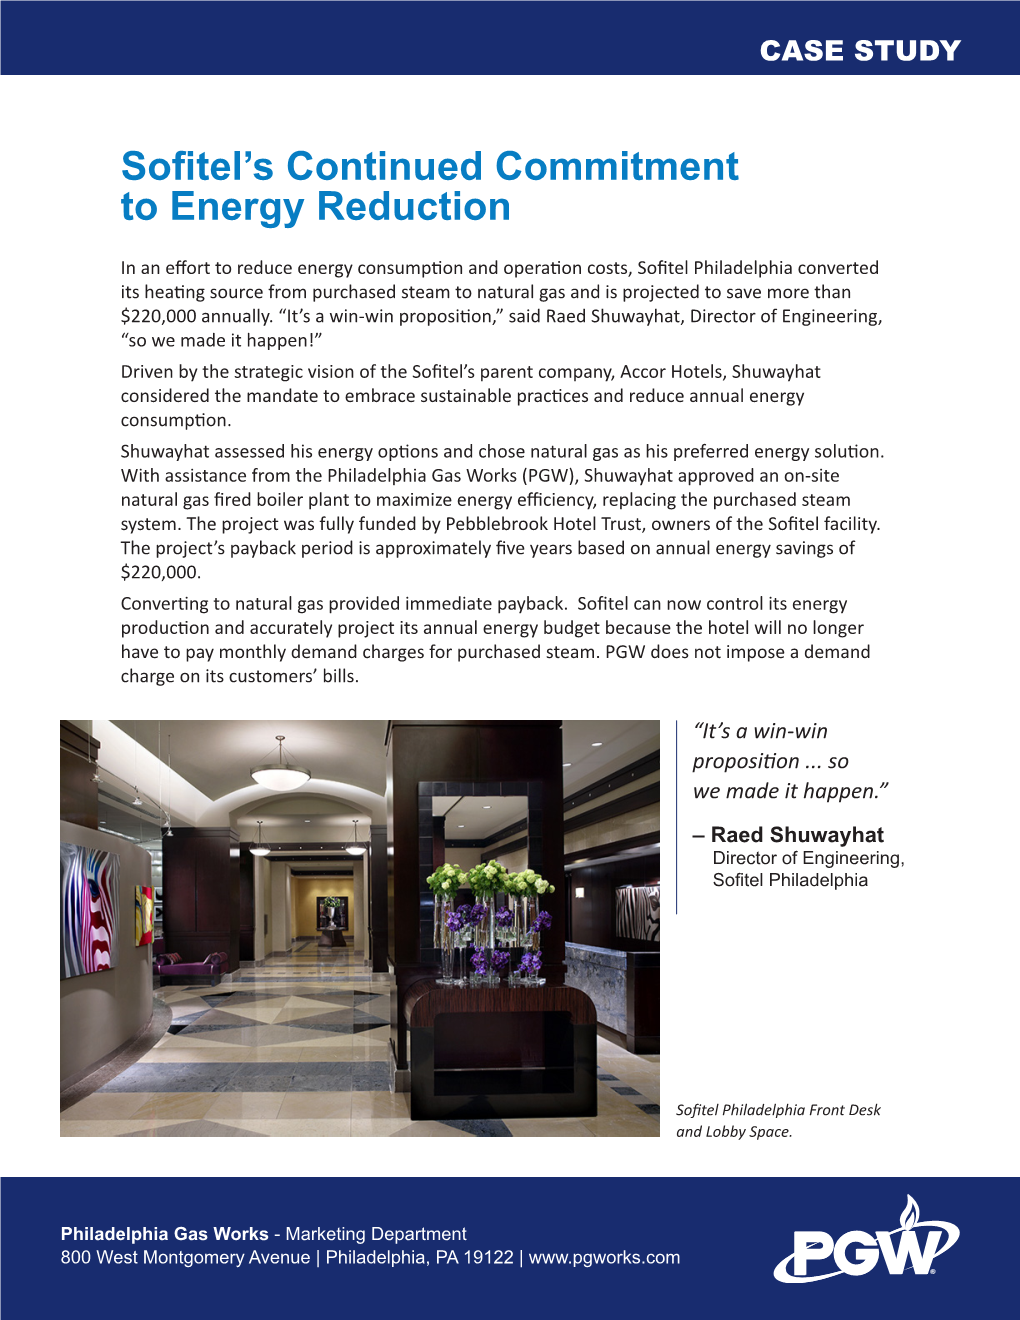 Sofitel’S Continued Commitment to Energy Reduction